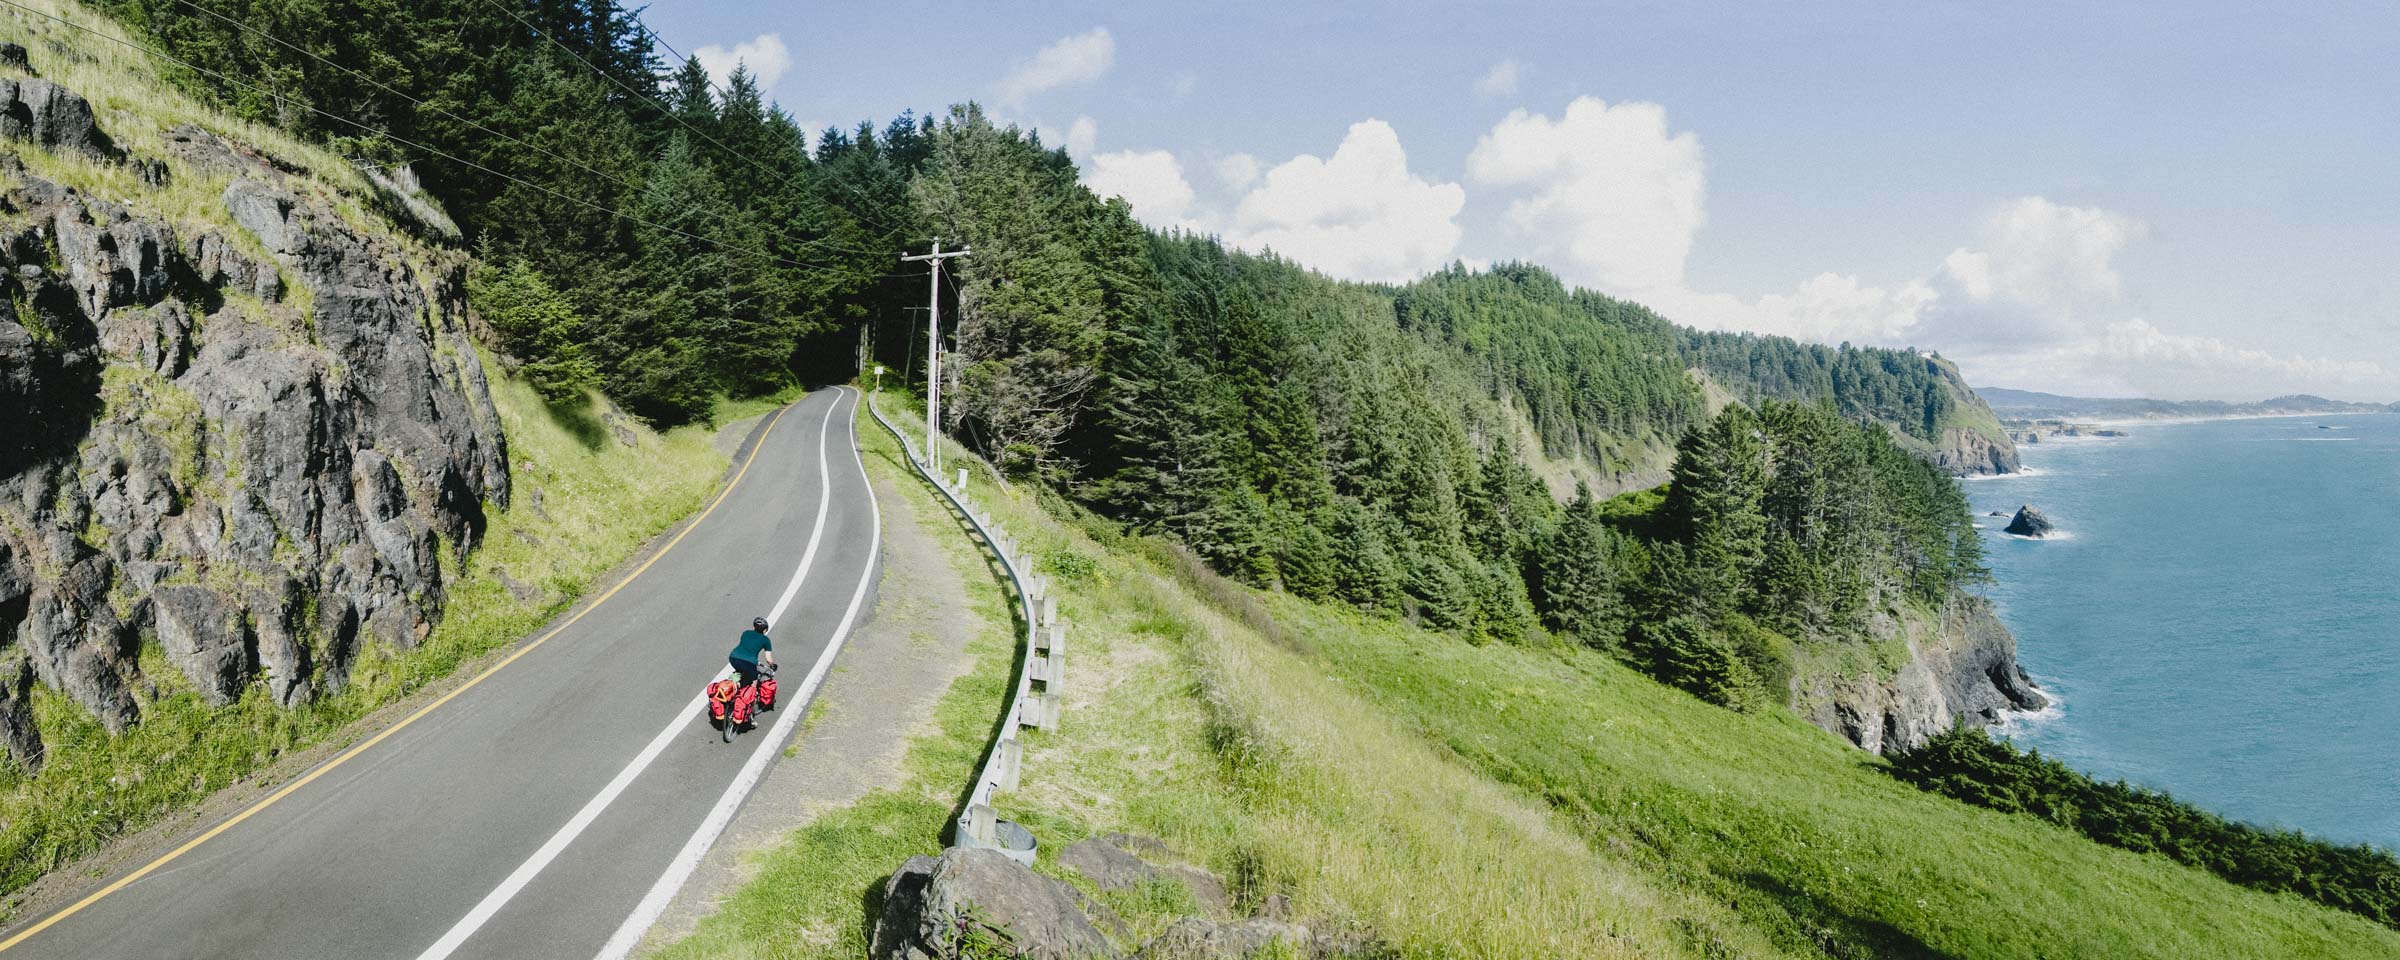 Bicycle touring down USA's scenic west coast